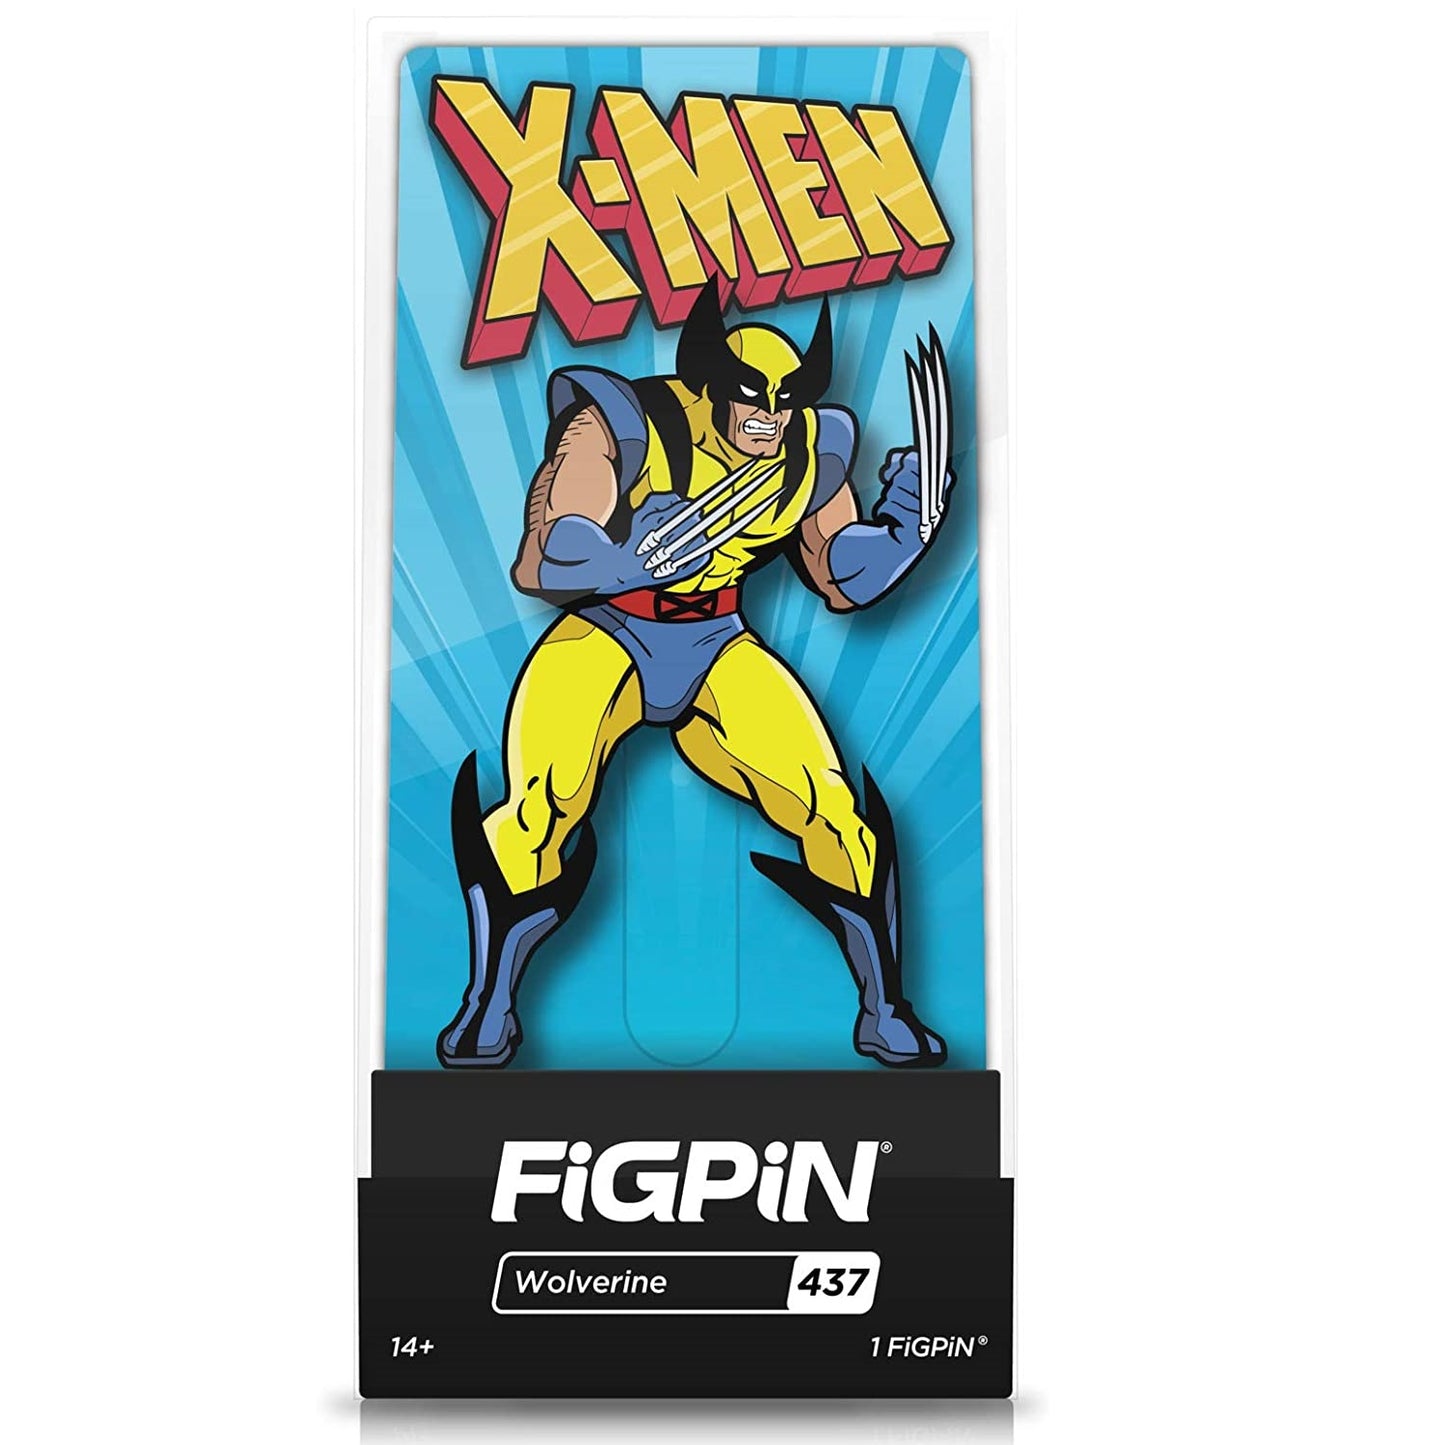 Wolverine from X-Men Animated Series enamel pin